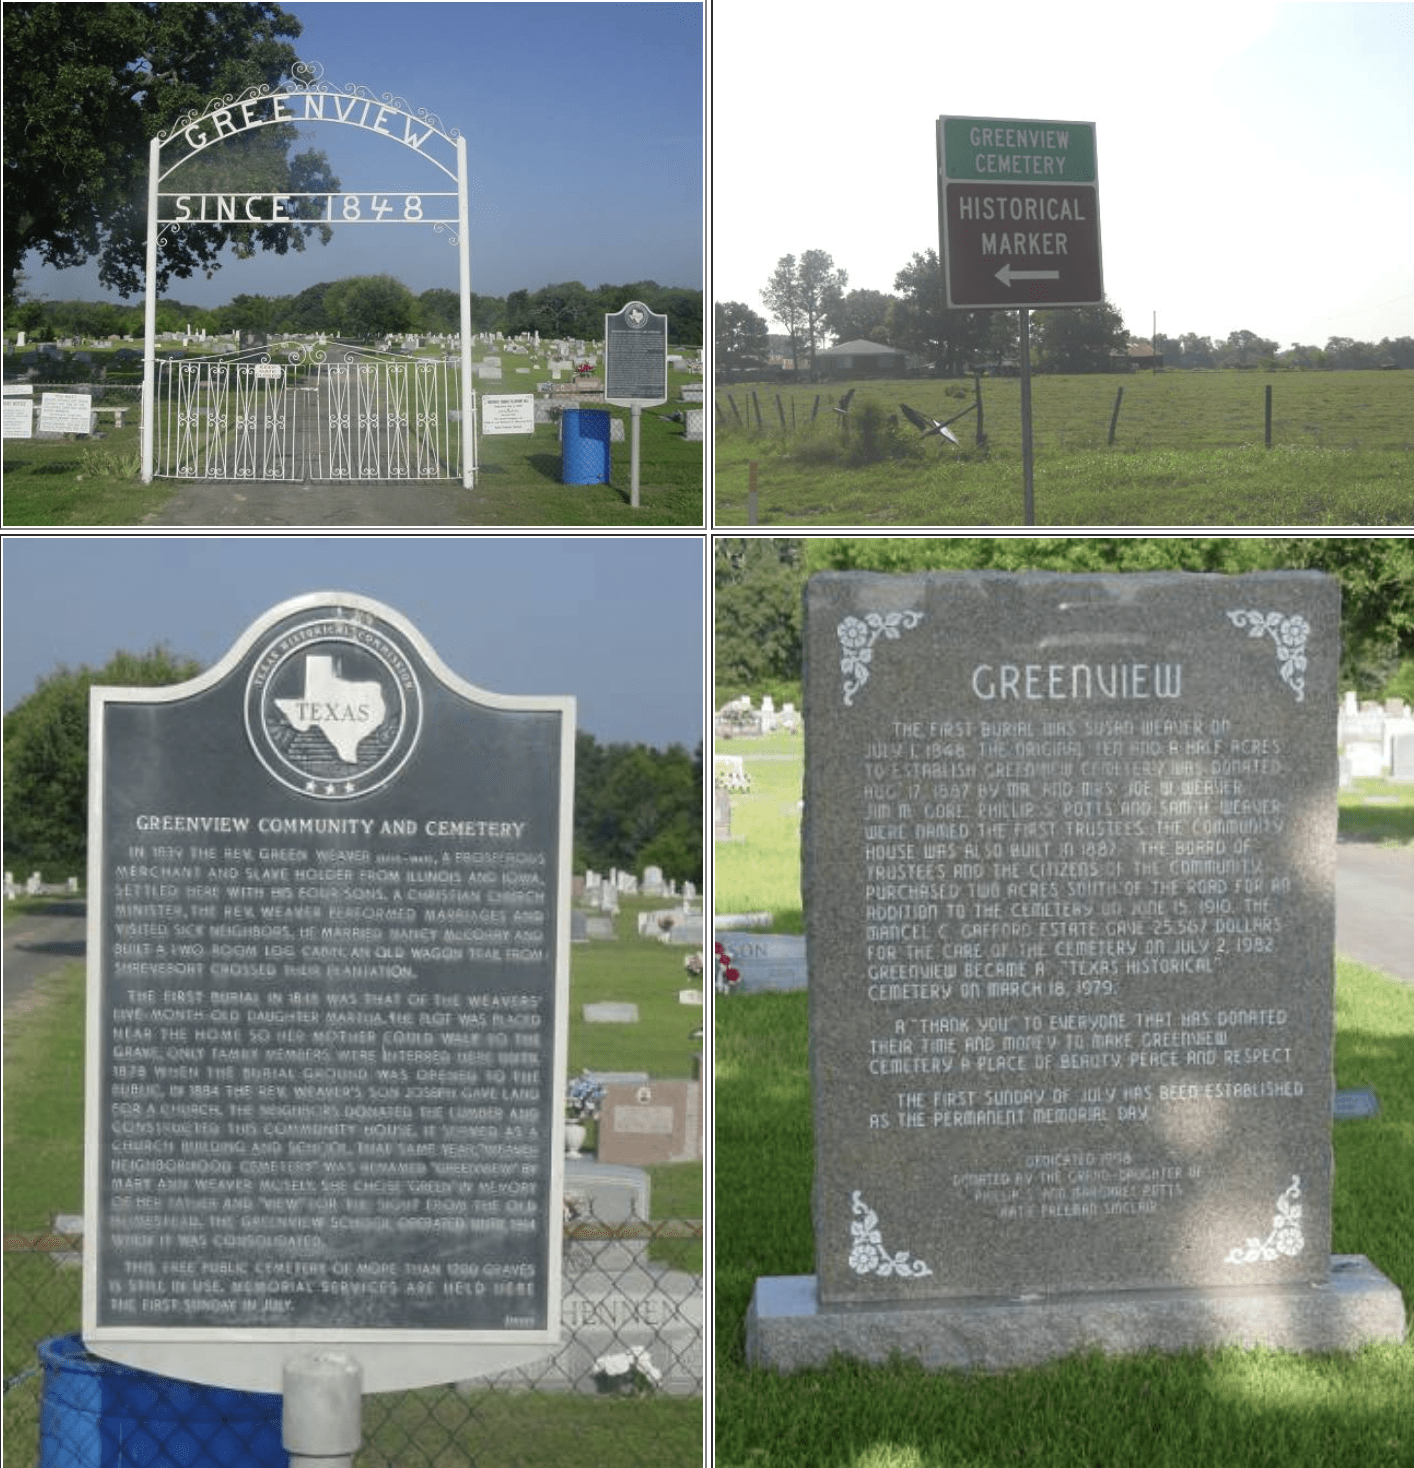 History of Greenview Cemetery